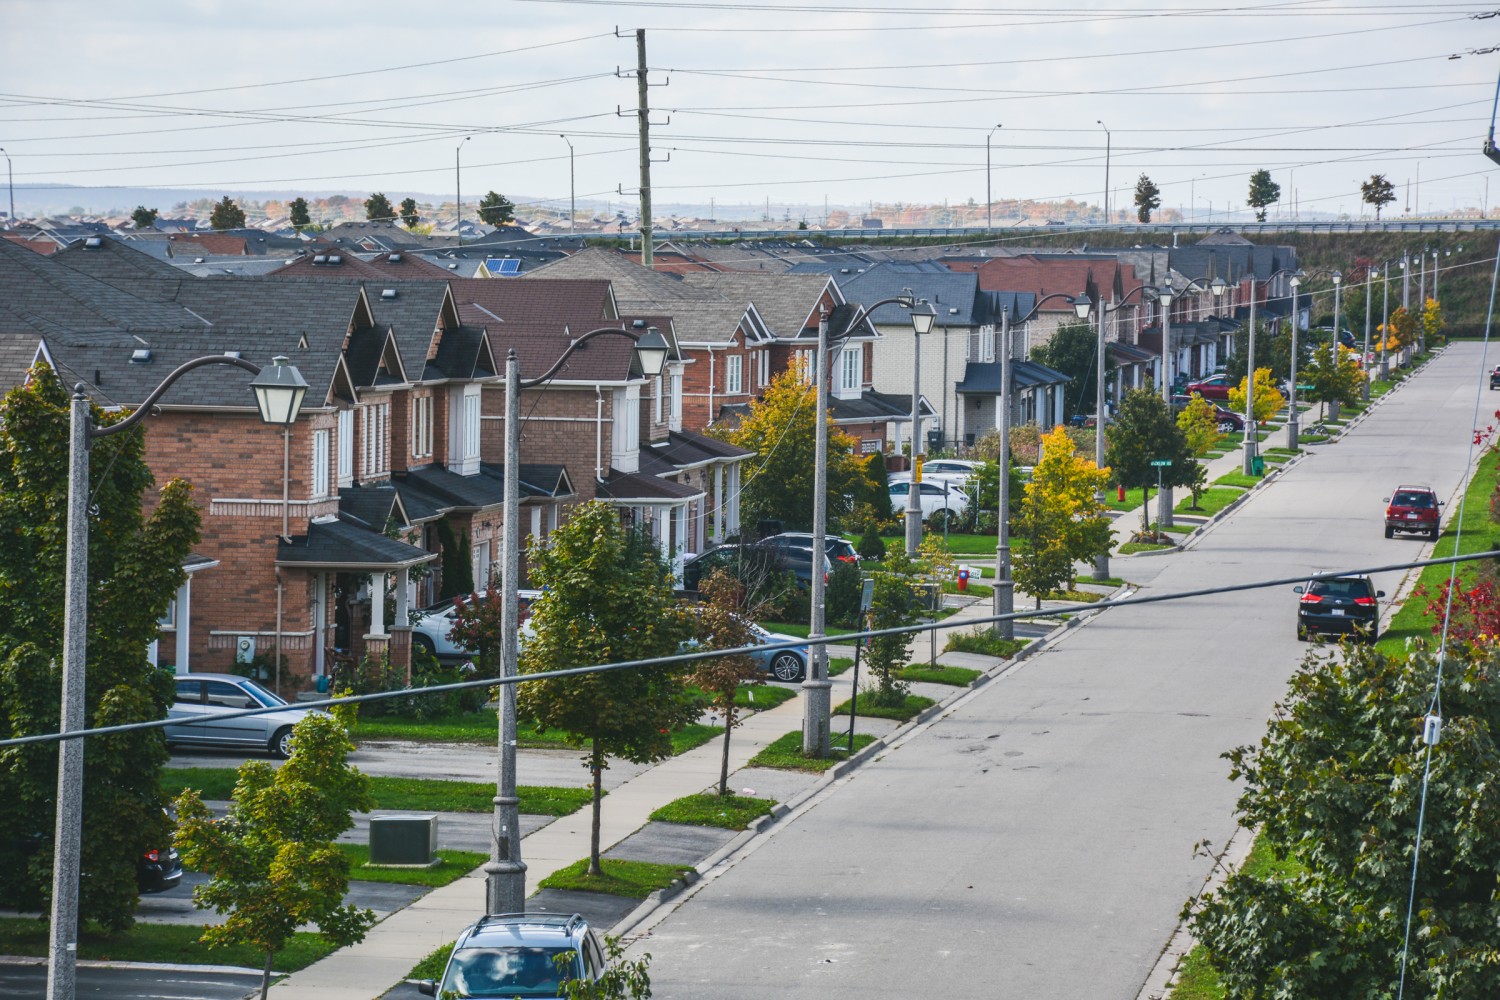 Brampton’s crippling suburban sprawl largely a result of consumer demand and willing developers